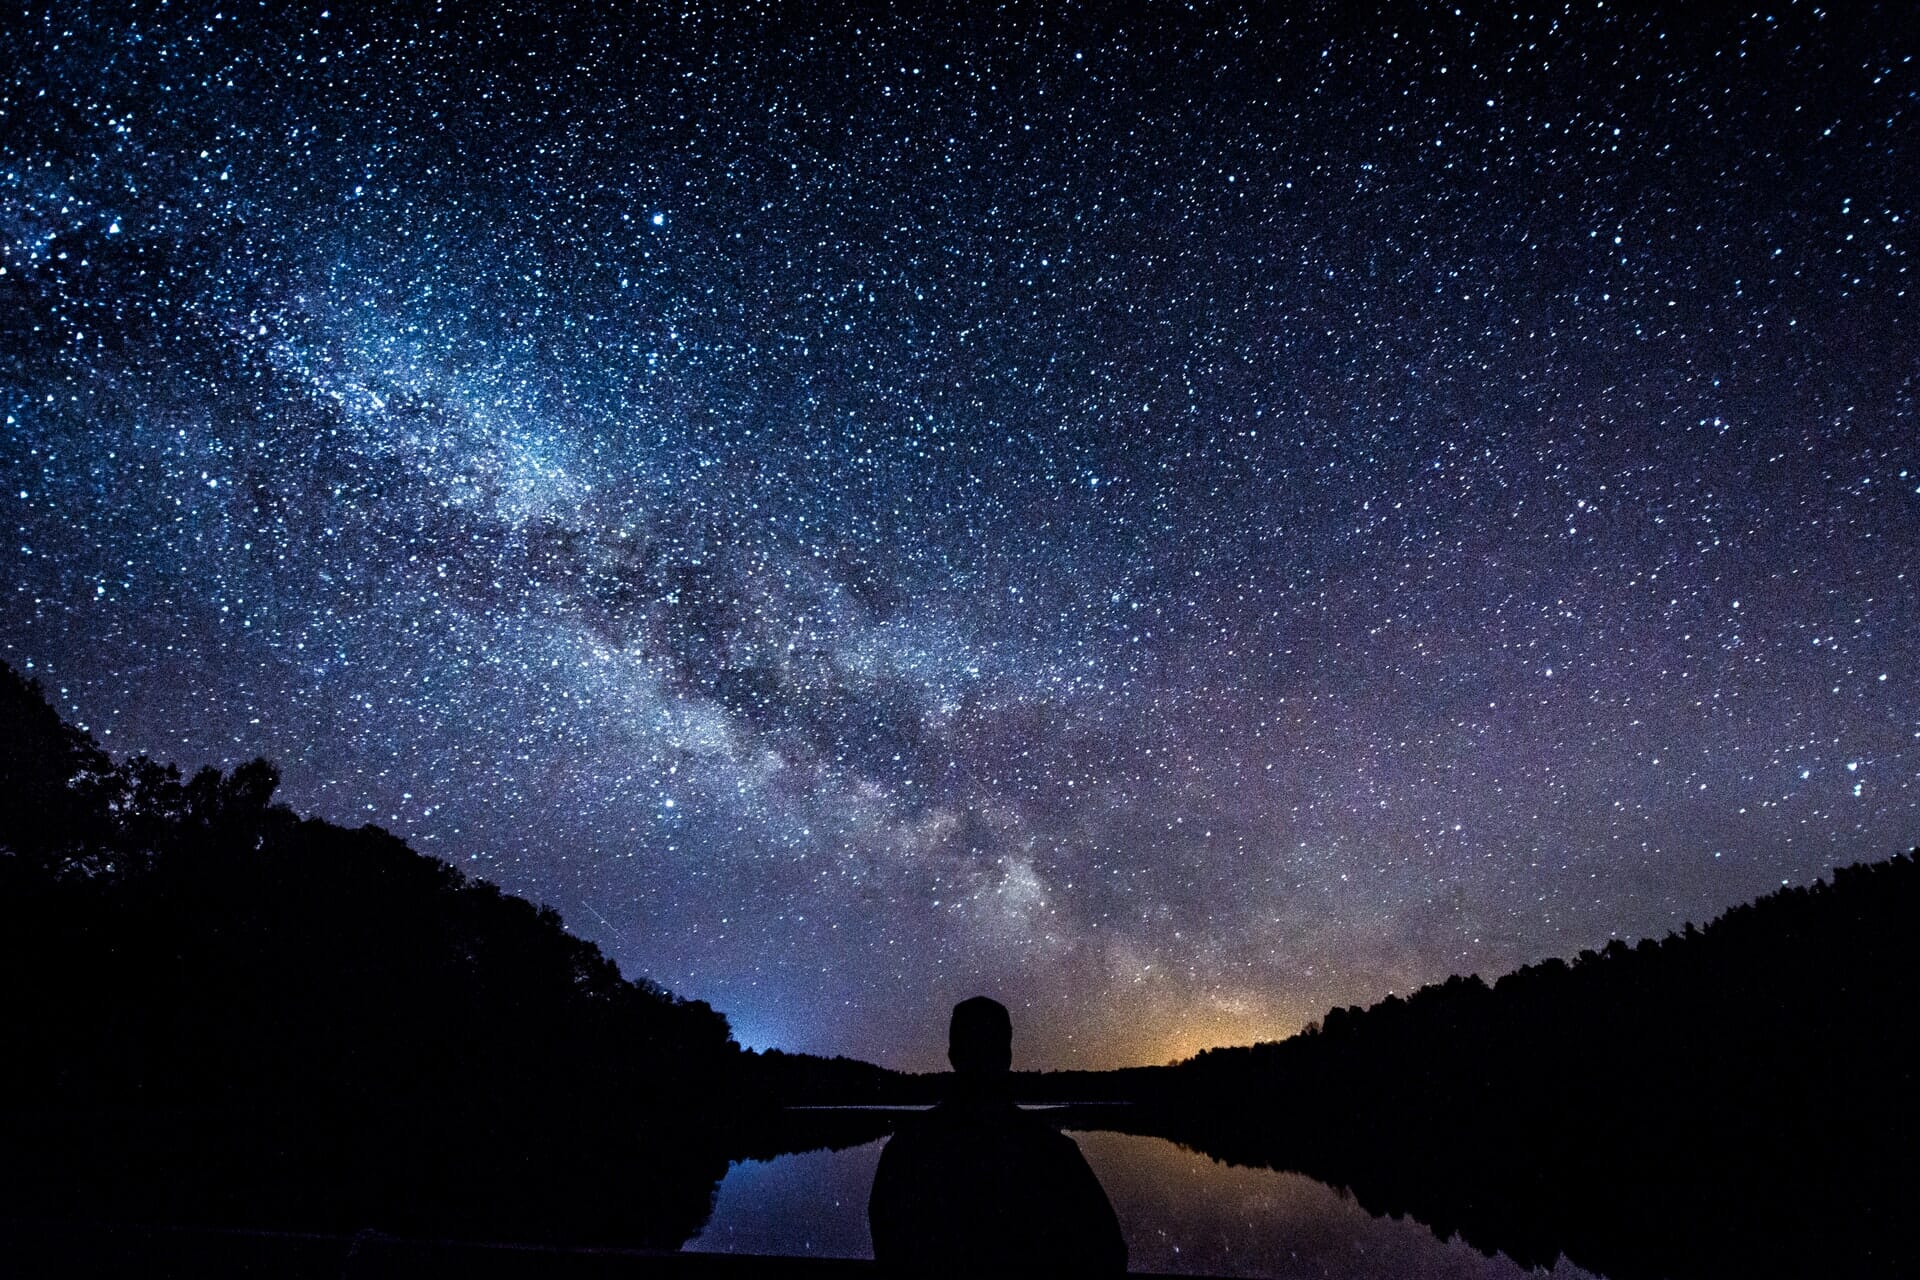 Starry skies with man in silhouette in foreground.